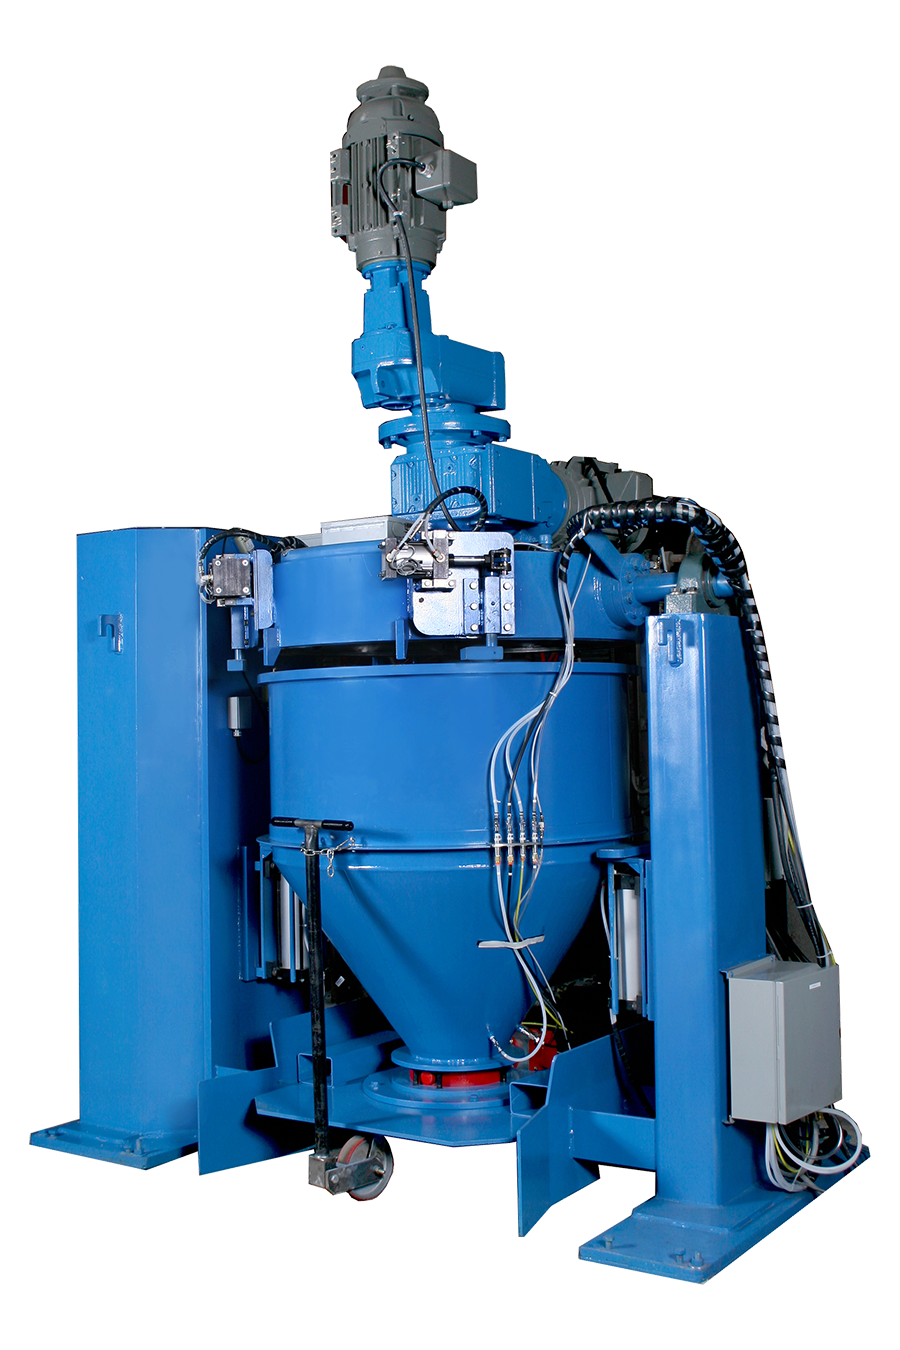 Mixer Hoppers specifically designed to aid the mixing process.